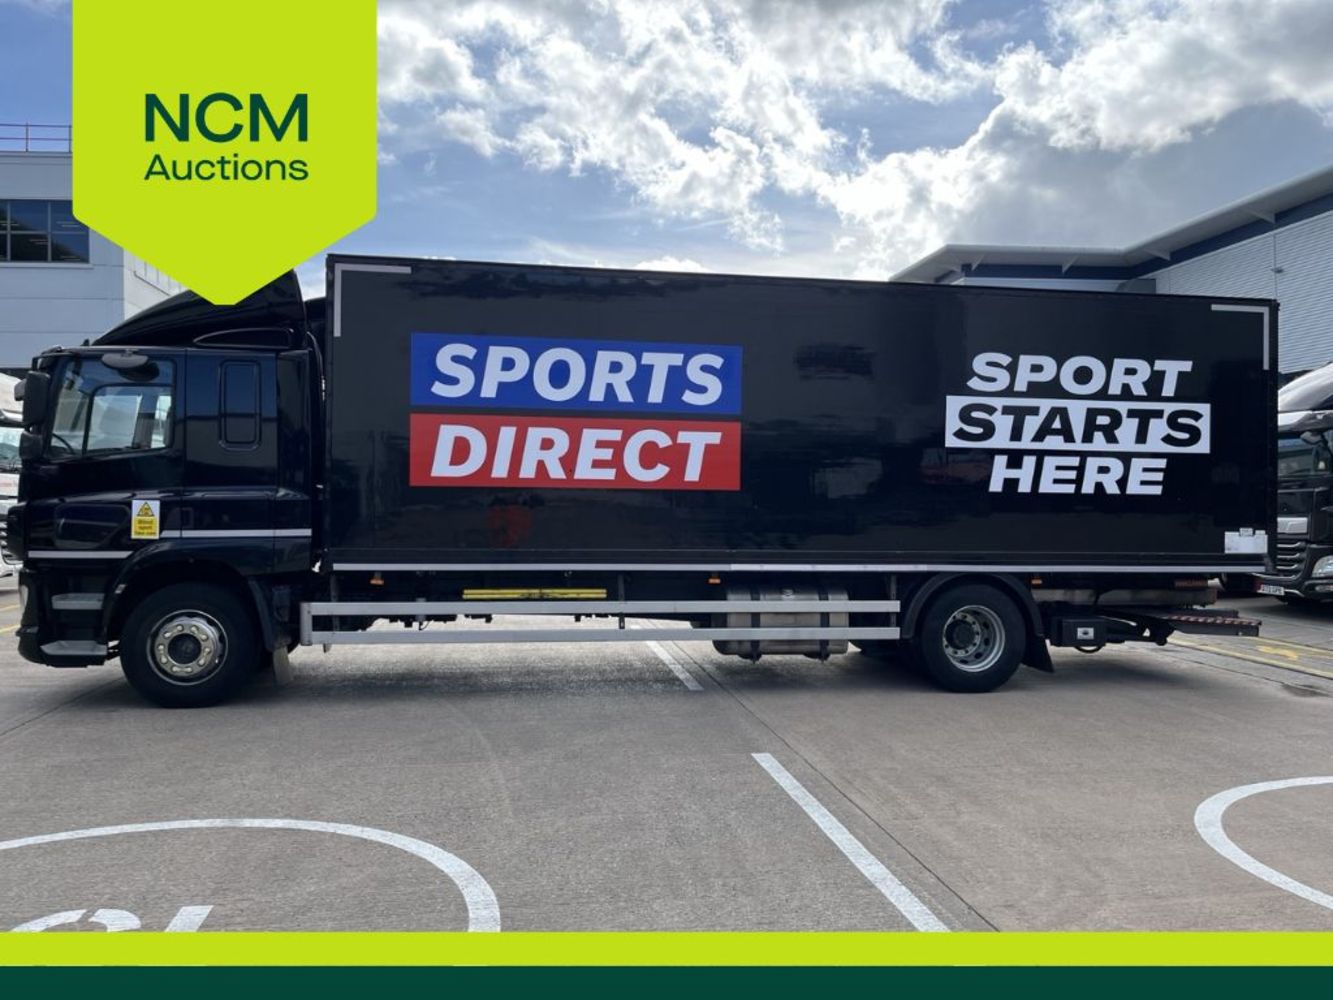 Plant, Machinery & Commercial Vehicles - Featuring 40ft Shipping Containers &  4 x 18 Ton - DAF Rigid Trucks from Retained Client, SPORTS DIRECT